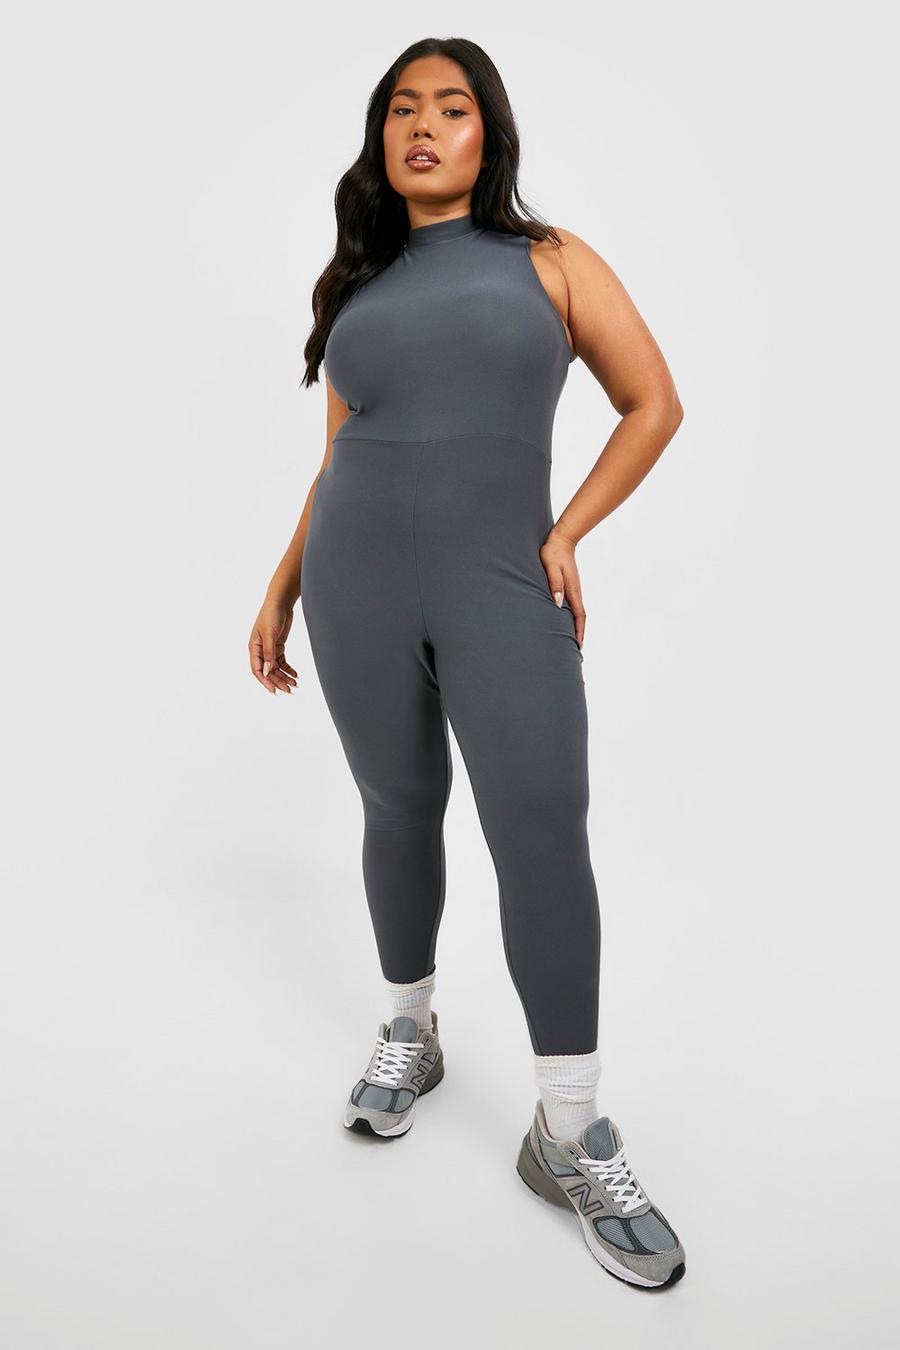 Charcoal grey Plus Soft Touch High Neck Unitard